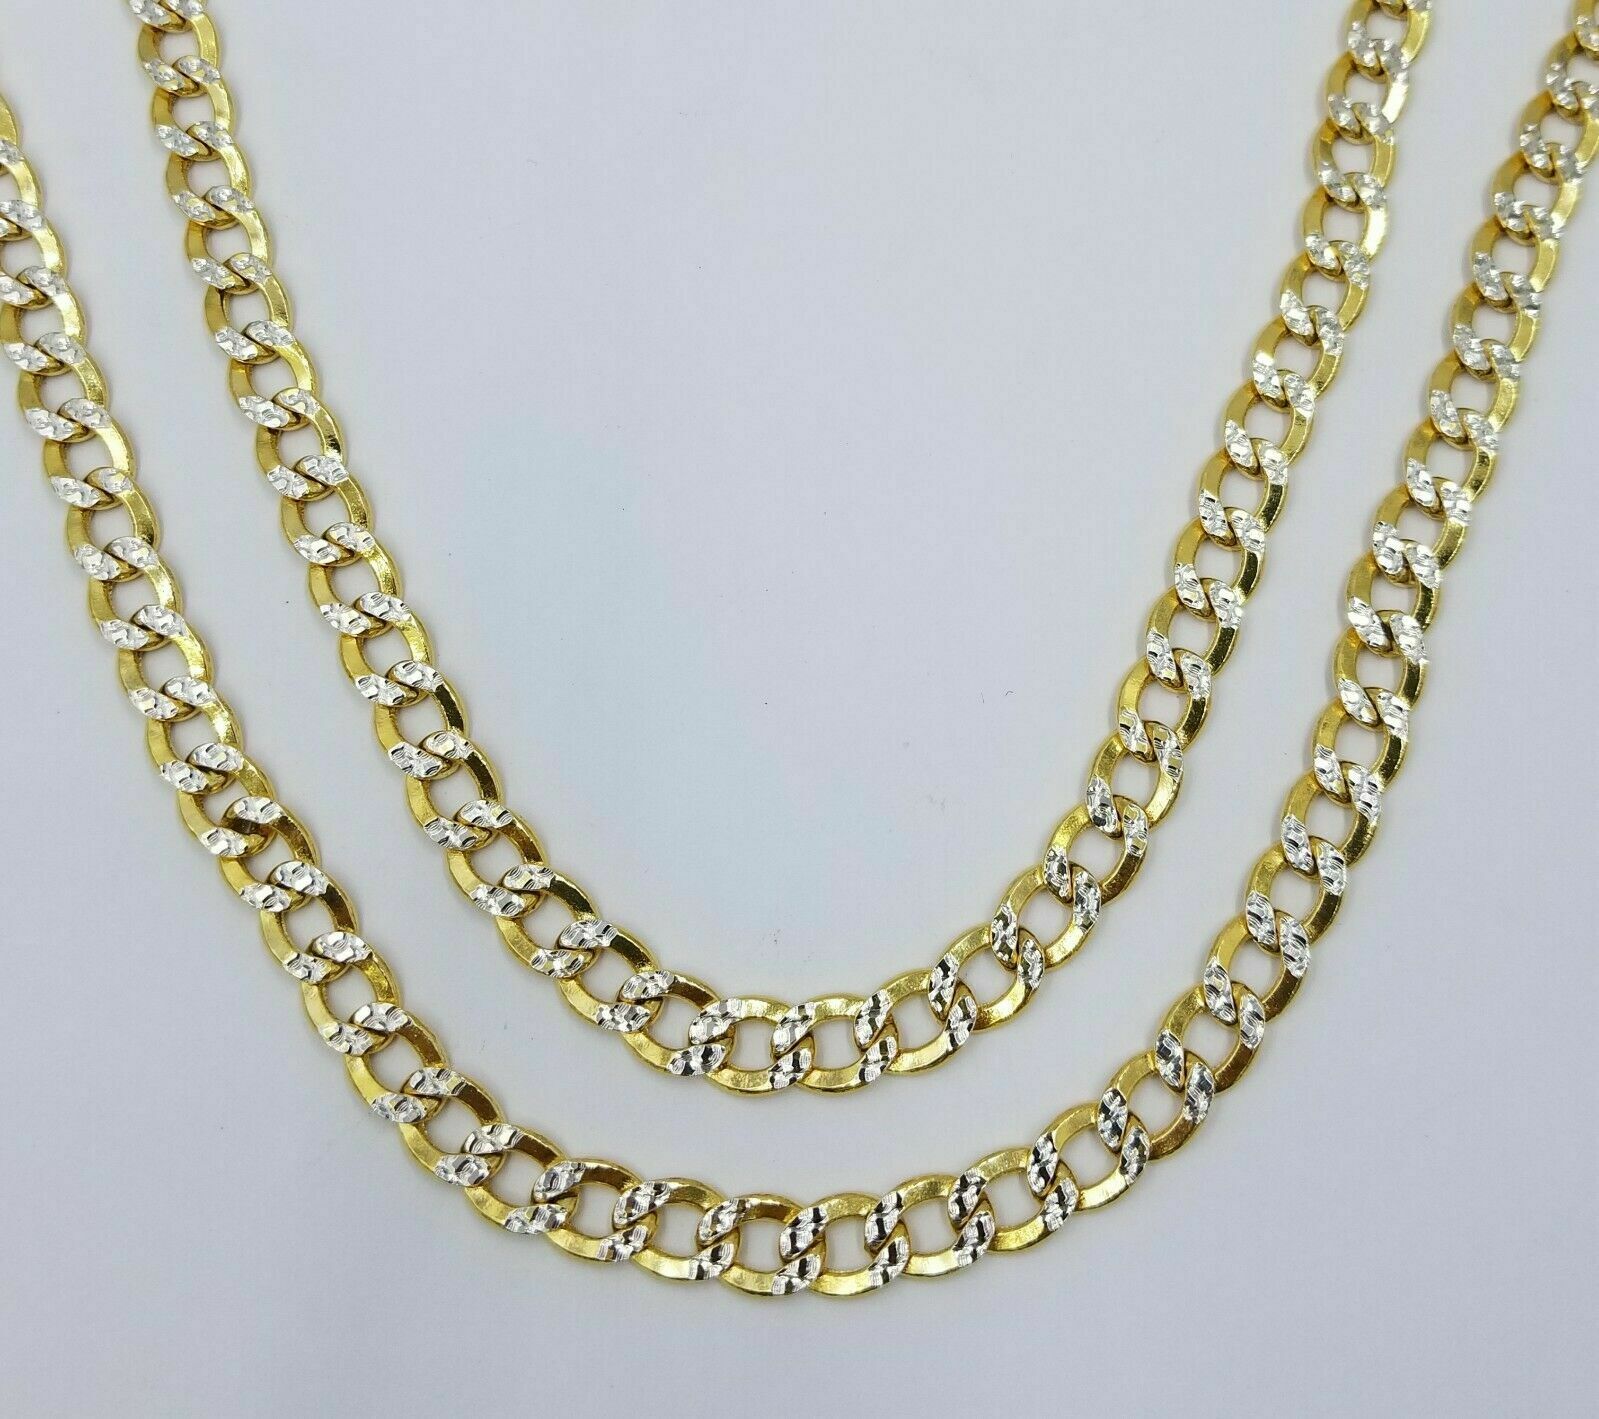 Real 10k Gold Mens Necklace Cuban Curb Link 9mm 24" Inch Diamond Cut SOLID Chain